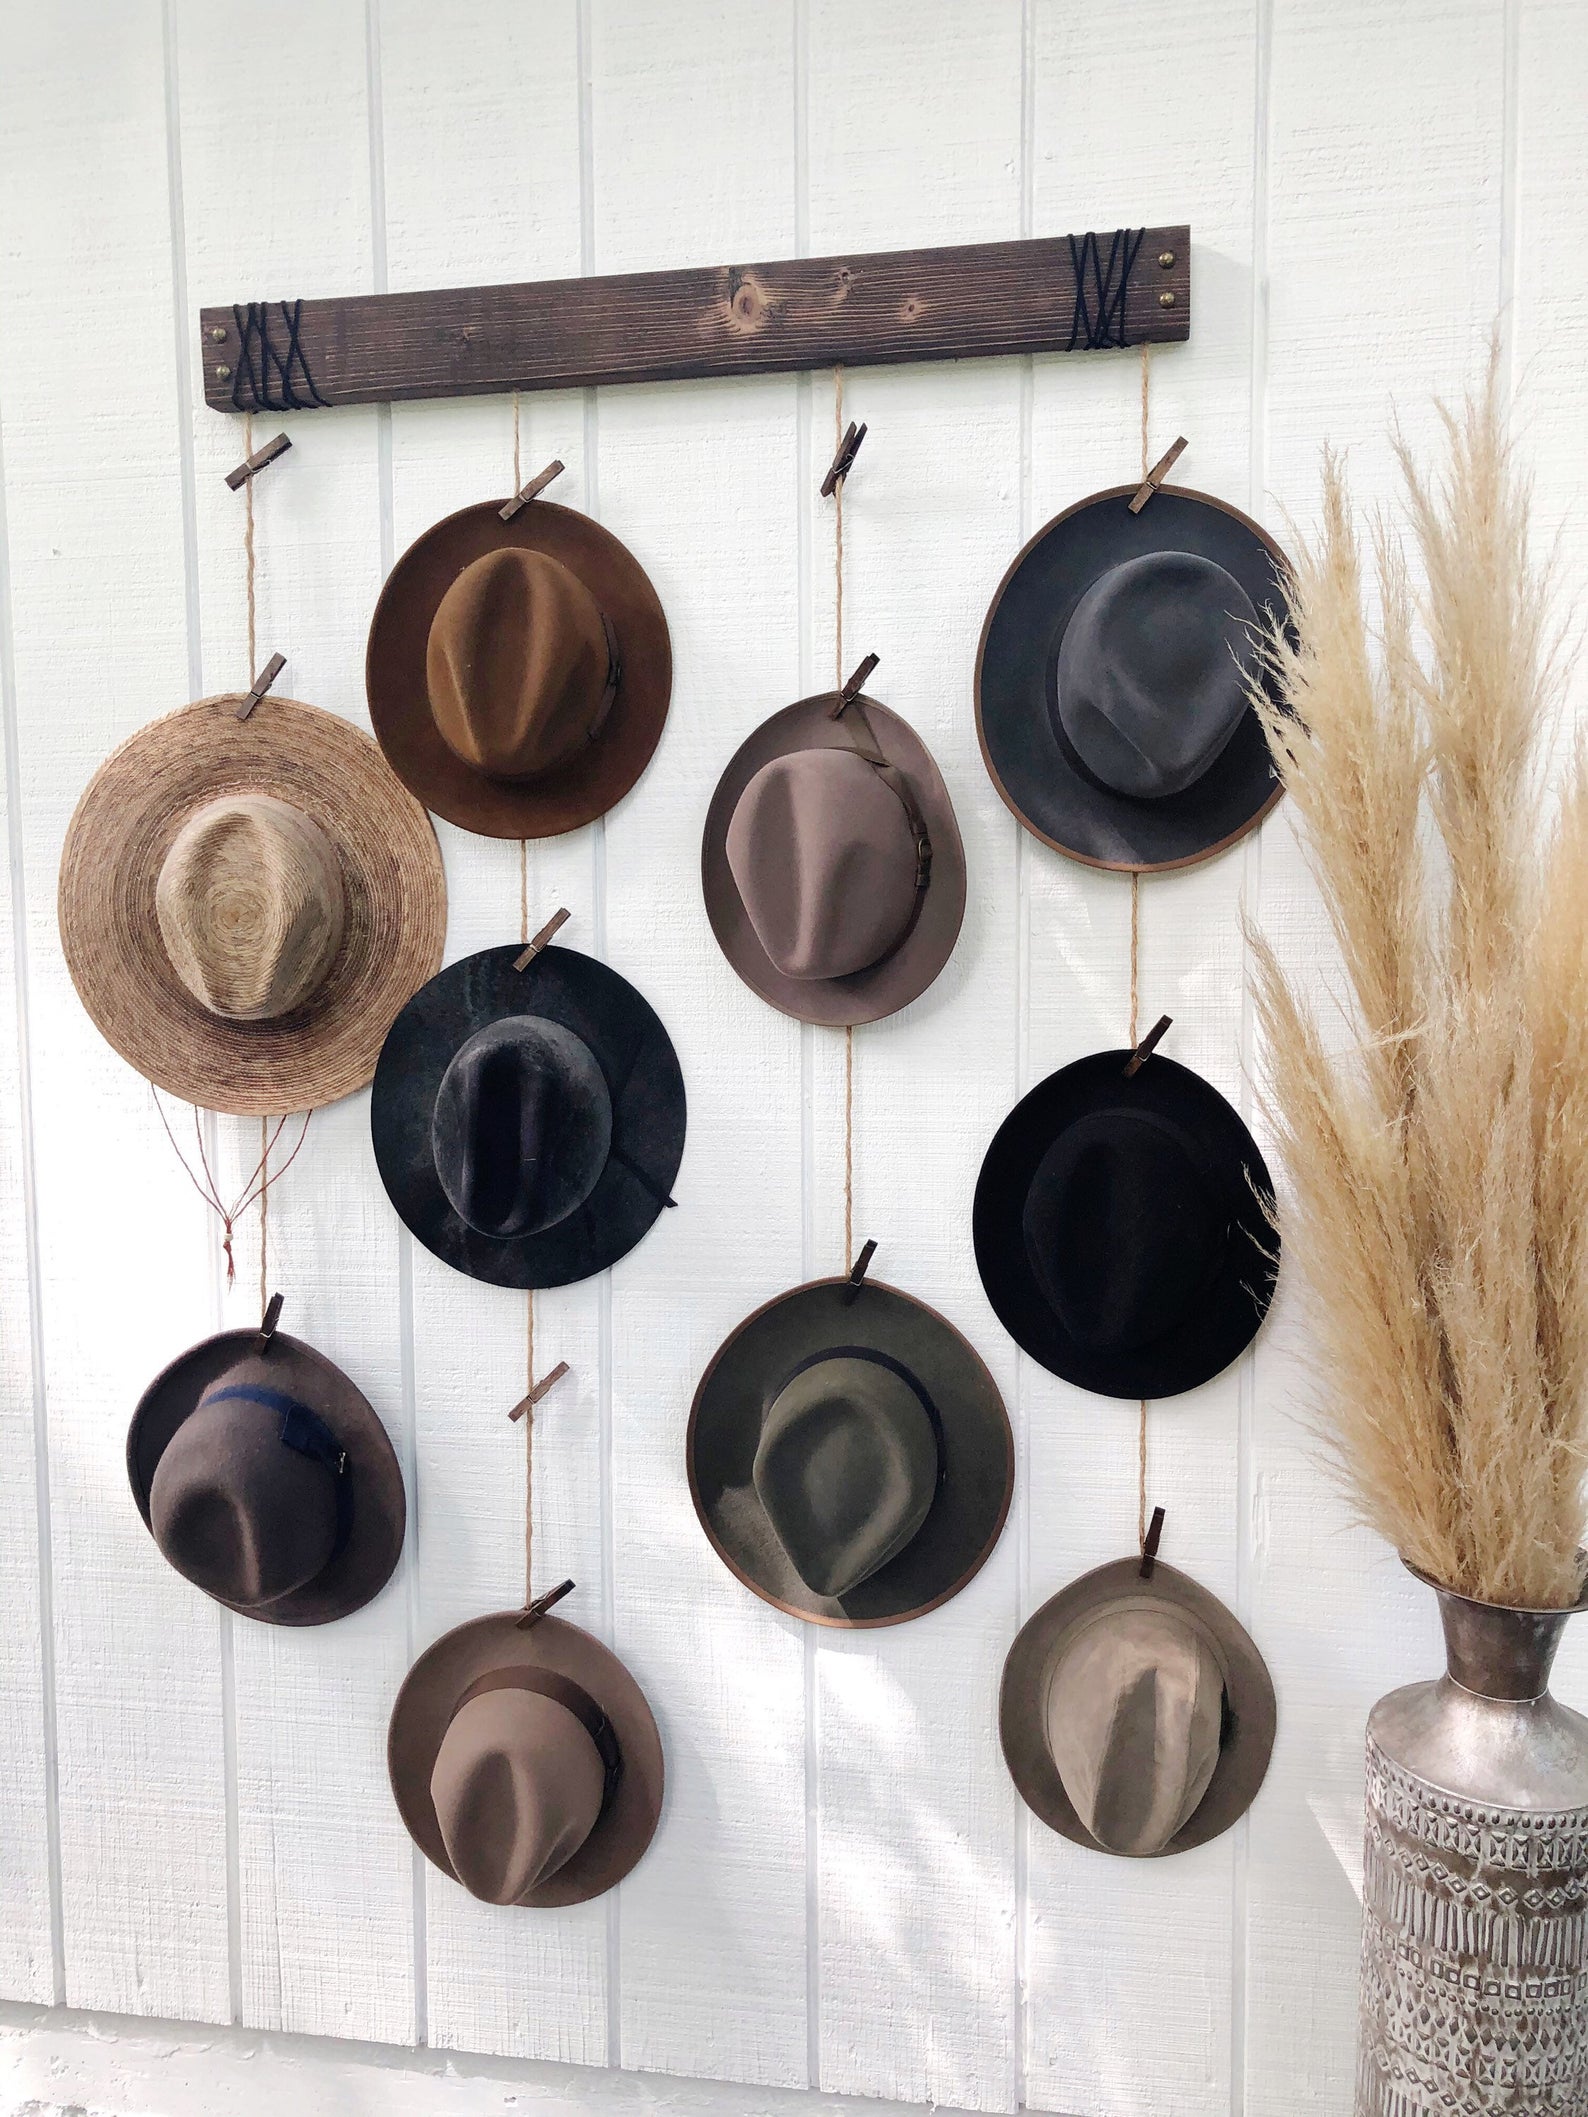 Hats hanging on a wall